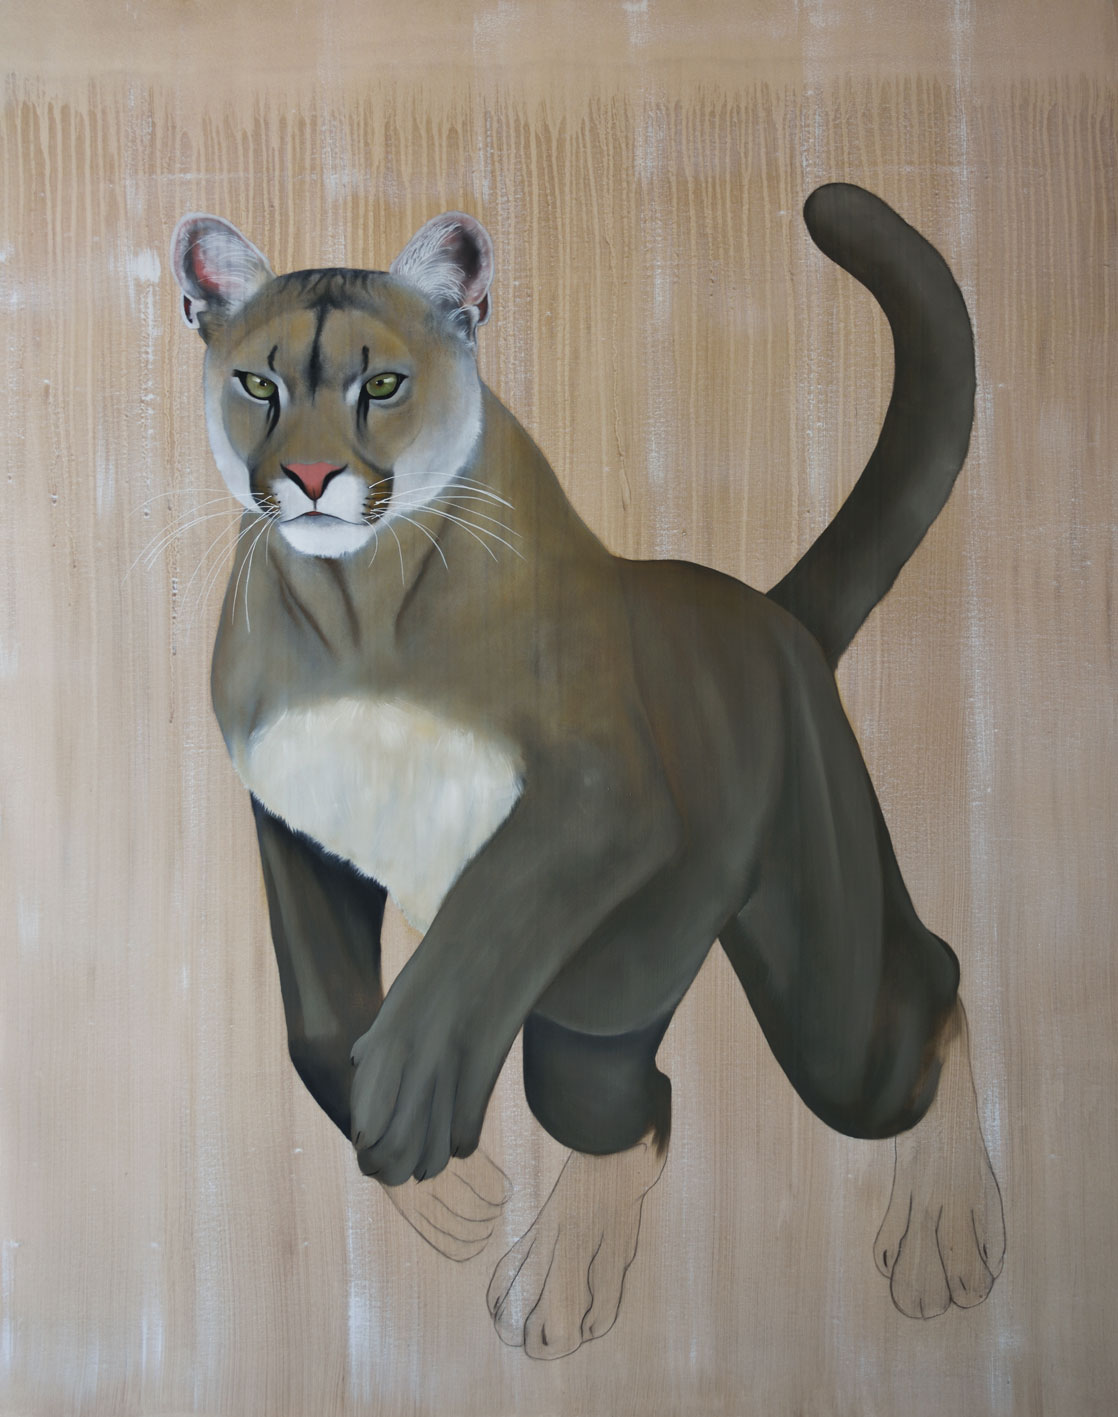 PUMA CONCOLOR CORYI cougar-puma Thierry Bisch Contemporary painter animals painting art decoration nature biodiversity conservation